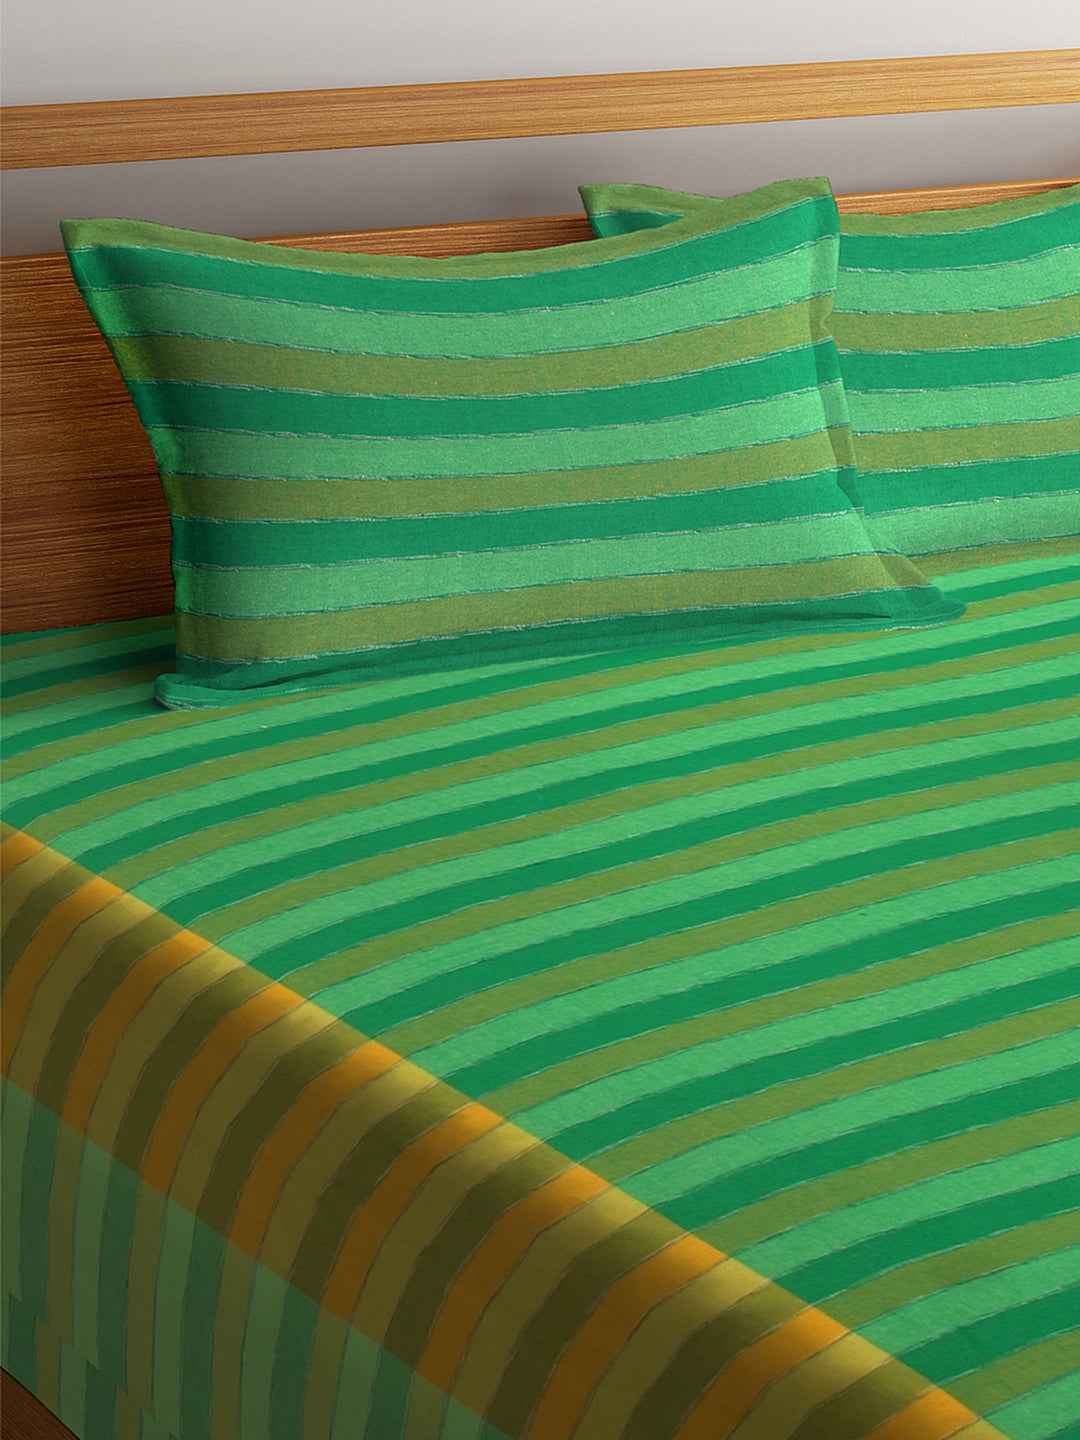 KLOTTHE Set of Two Green Cotton Woven Design Double King Bed Covers With 4 Pillow Covers (250X225 cm)